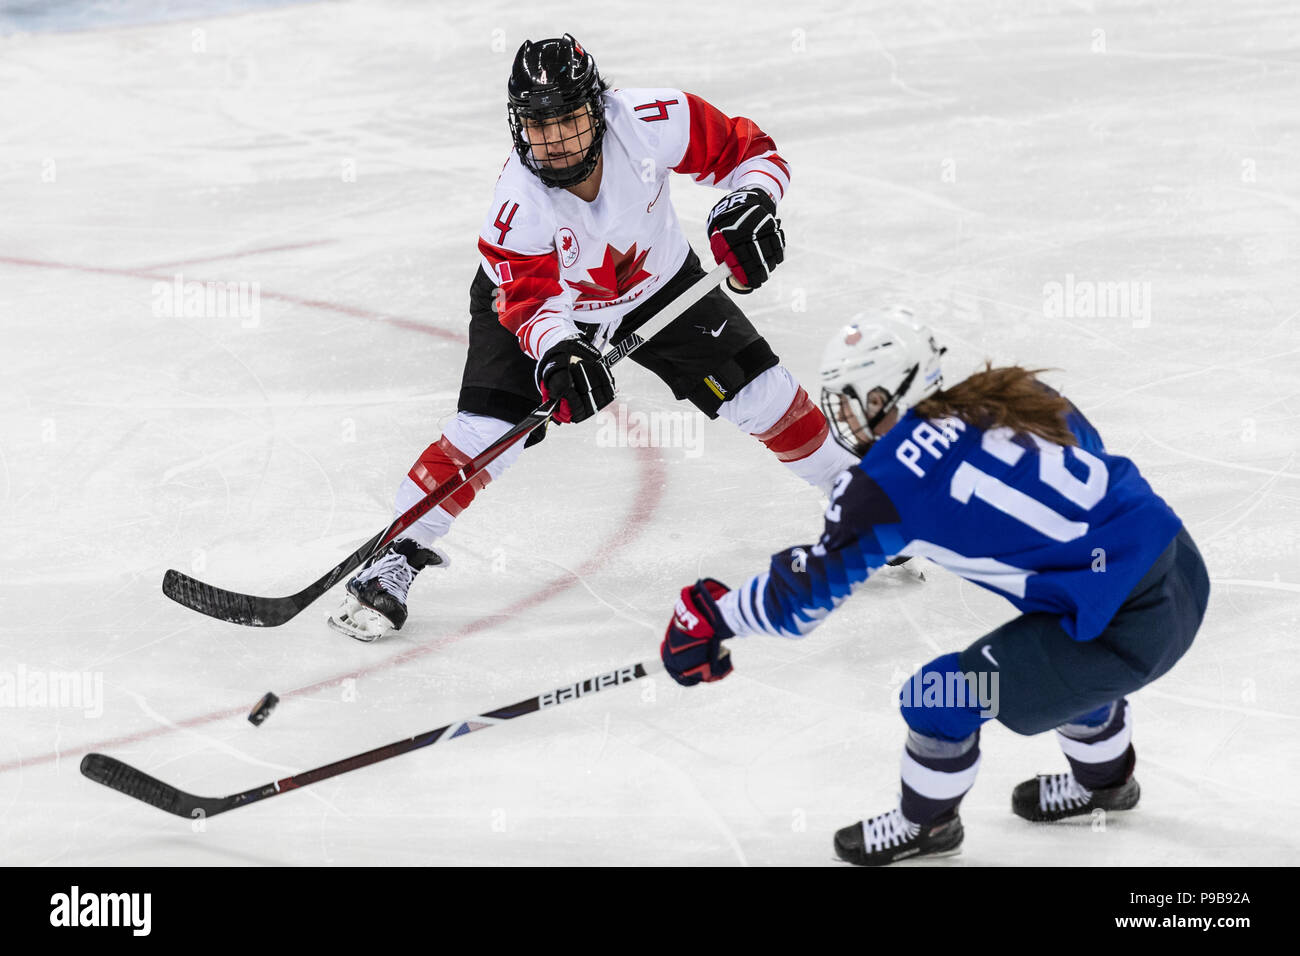 Brigette Lacquette (CAN) during the Gold medal Women's Ice Hockey game USA vs Canada at the Olympic Winter Games PyeongChang 2018 Stock Photo